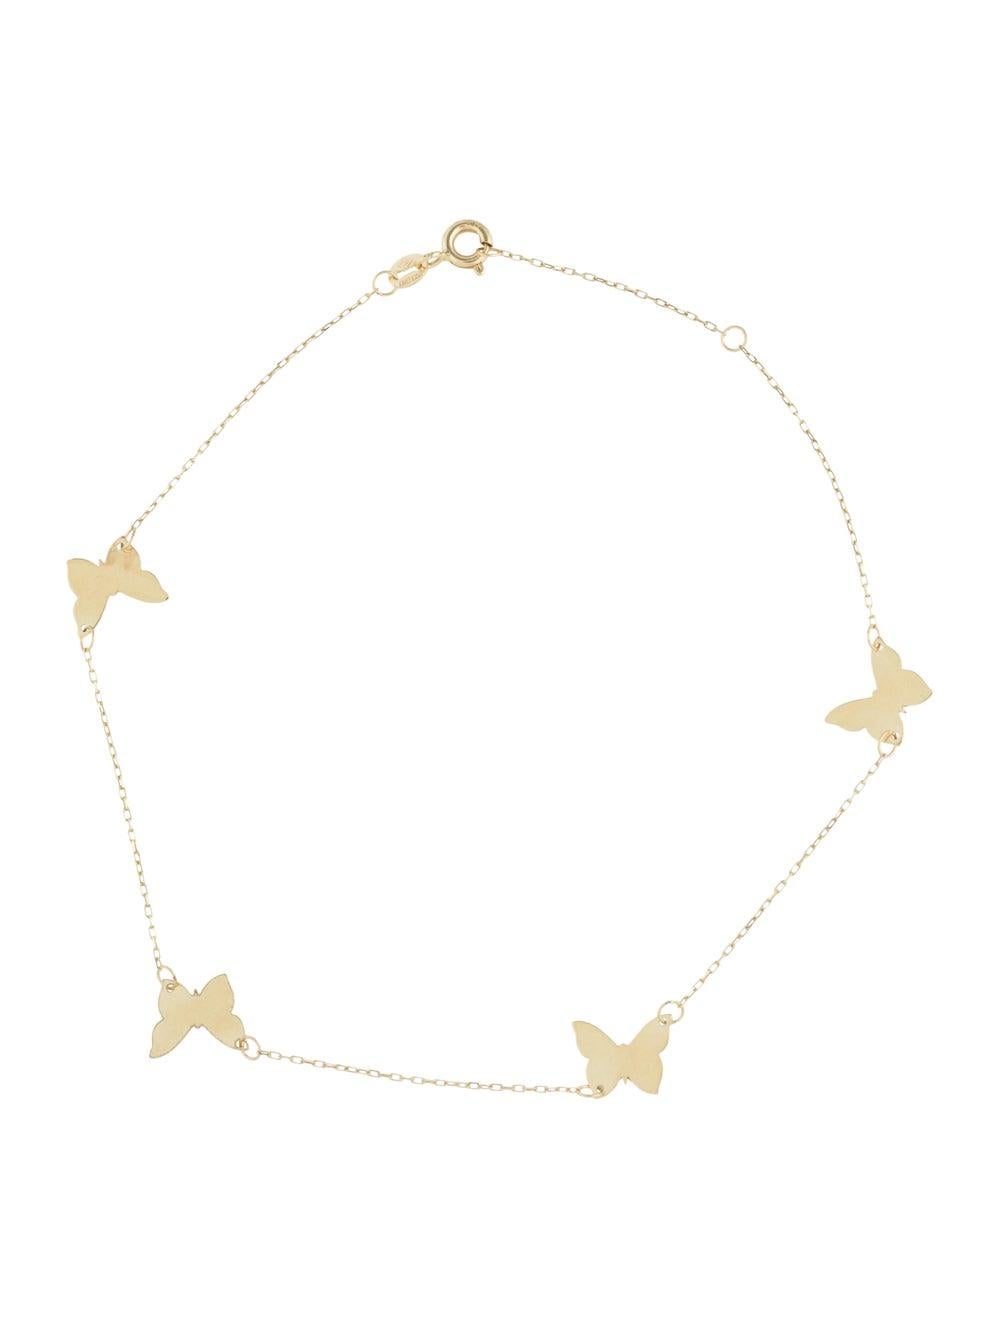 Station Butterfly Anklet: This Simple & Beautiful Rope Chain anklet is measured 9-10